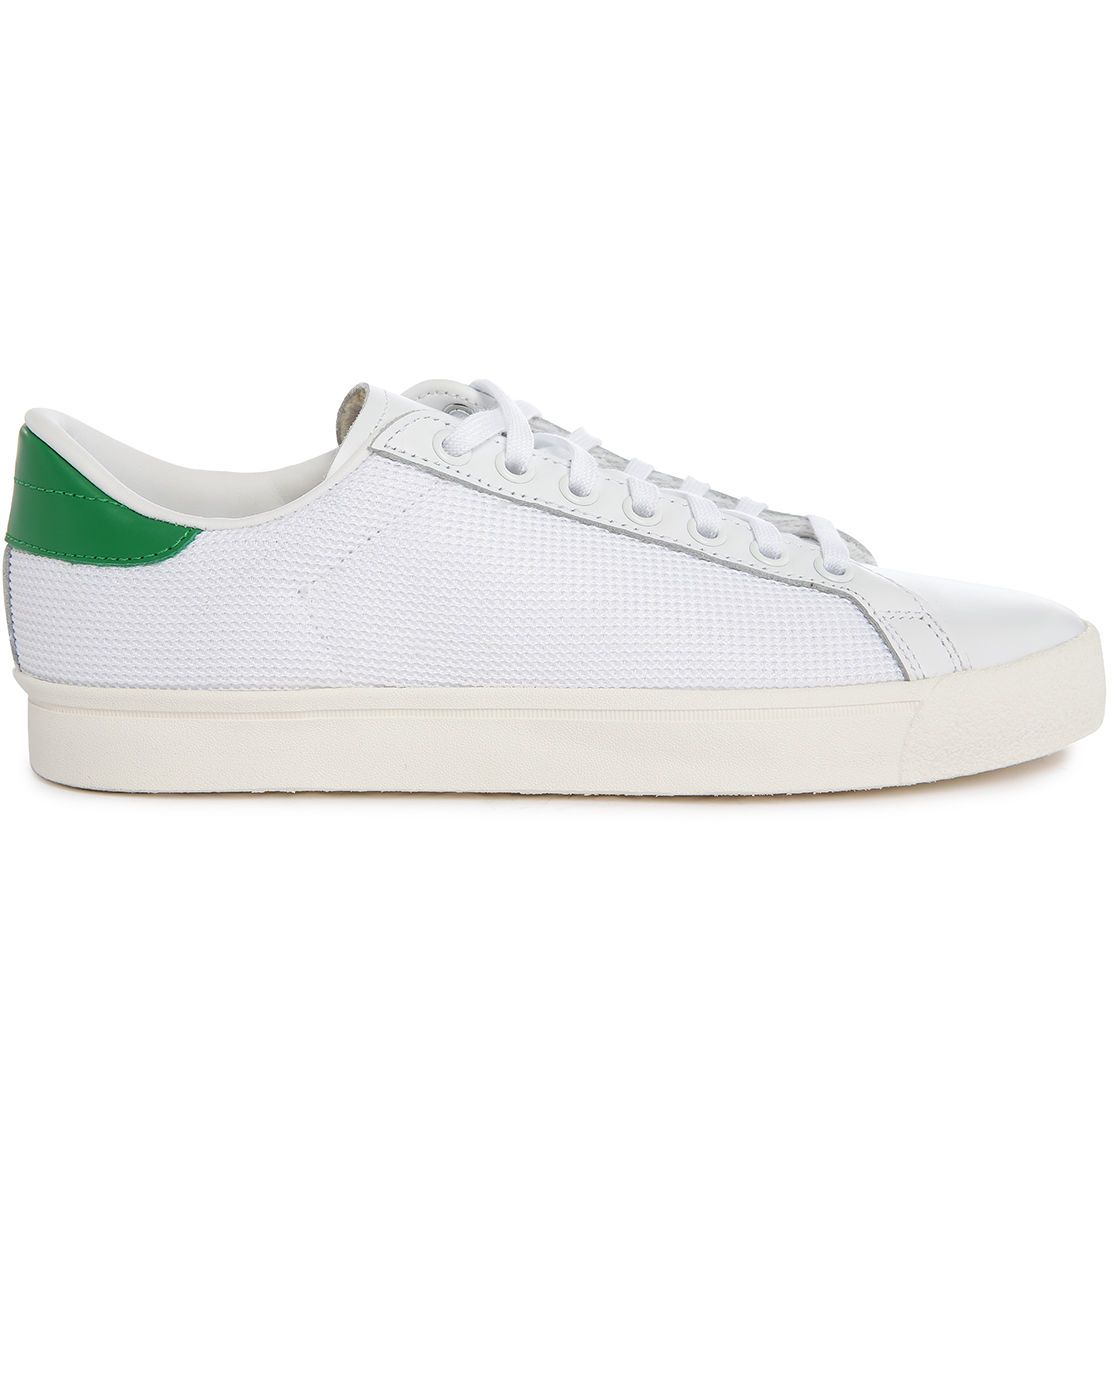 Adidas originals Rod Laver Vintage White Leather/mesh Sneakers in White ...